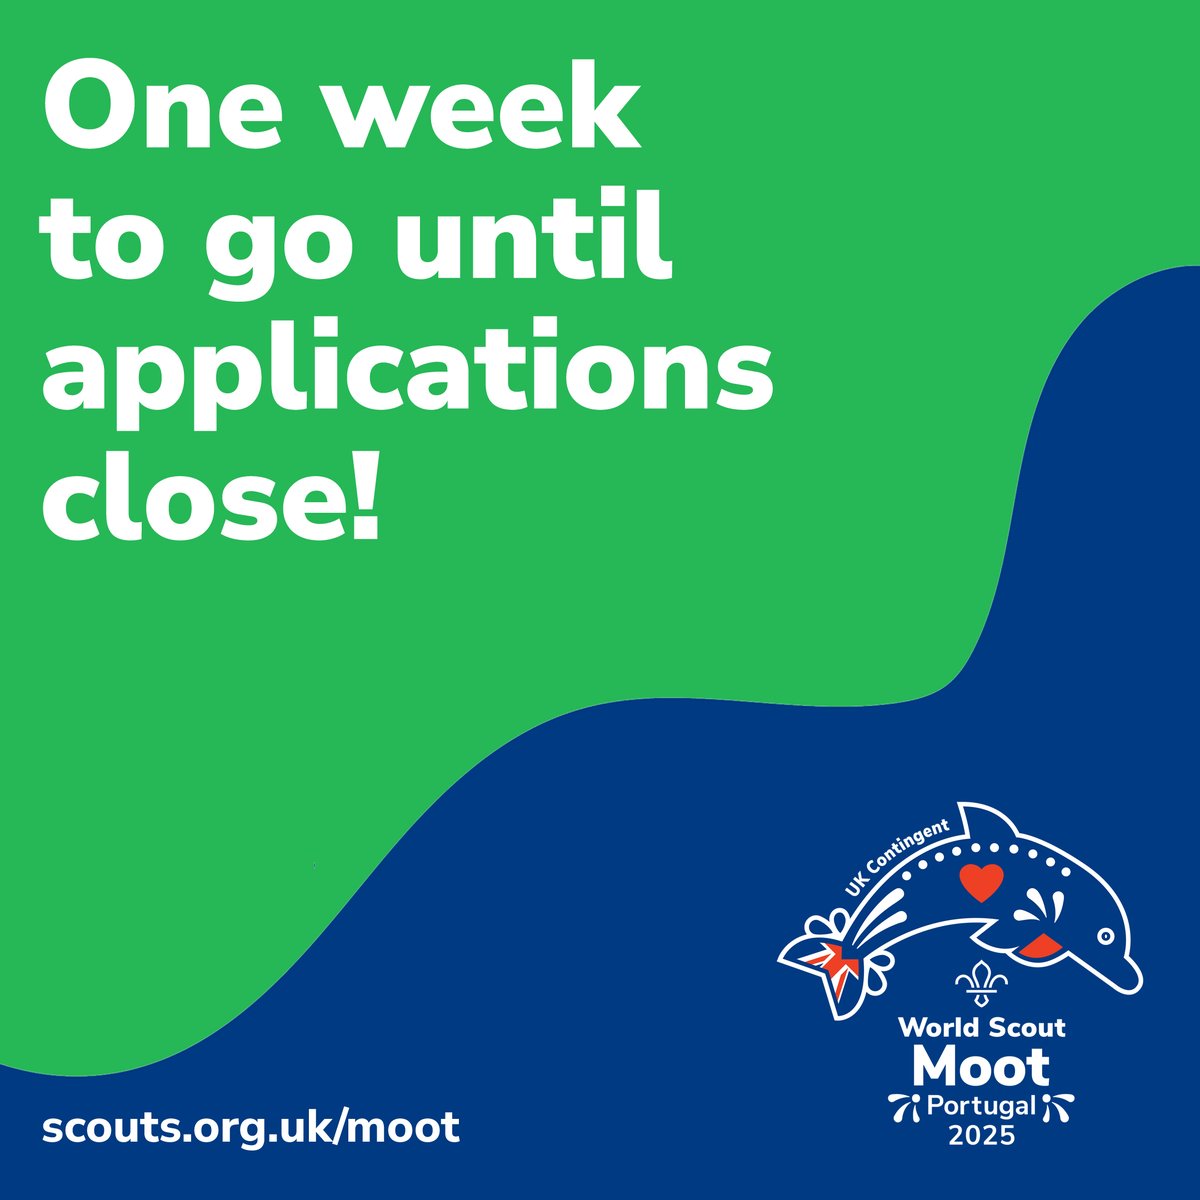 There's only one week to go to submit your application and dive into the World Scout Moot 2025 in Portugal! 🇵🇹 Surf over to our website to read a brilliant blog from Christina all about how the recruitment process works and how you can apply 👇 scouts.org.uk/mootblog #MootUK